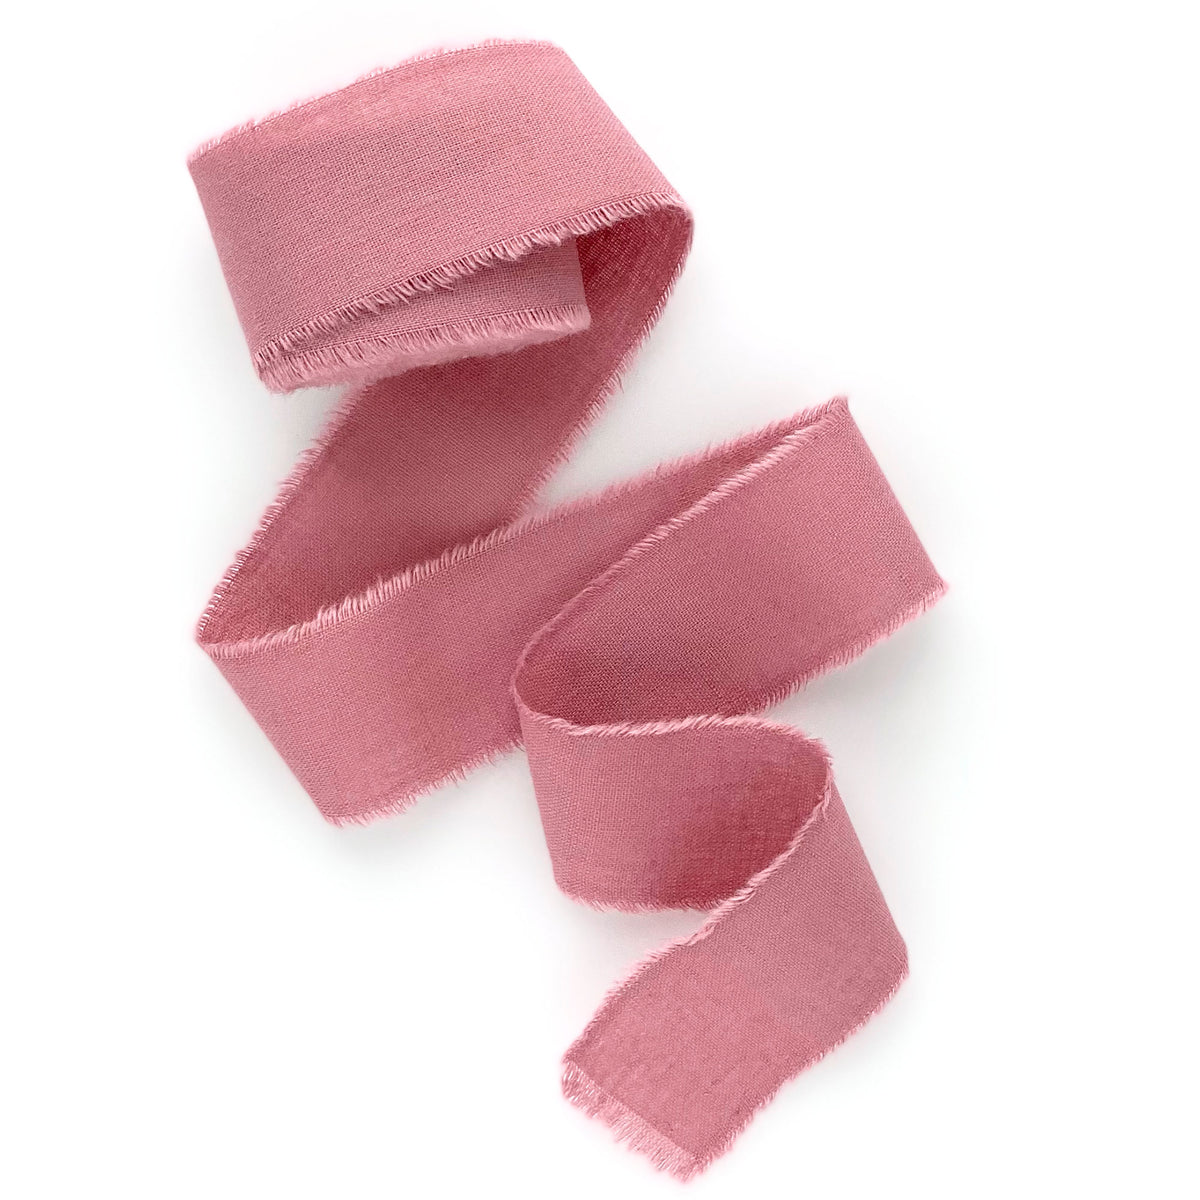 Dusty Rose Pink Deluxe 1 1/2 Inch x 50 Yards Satin Ribbon